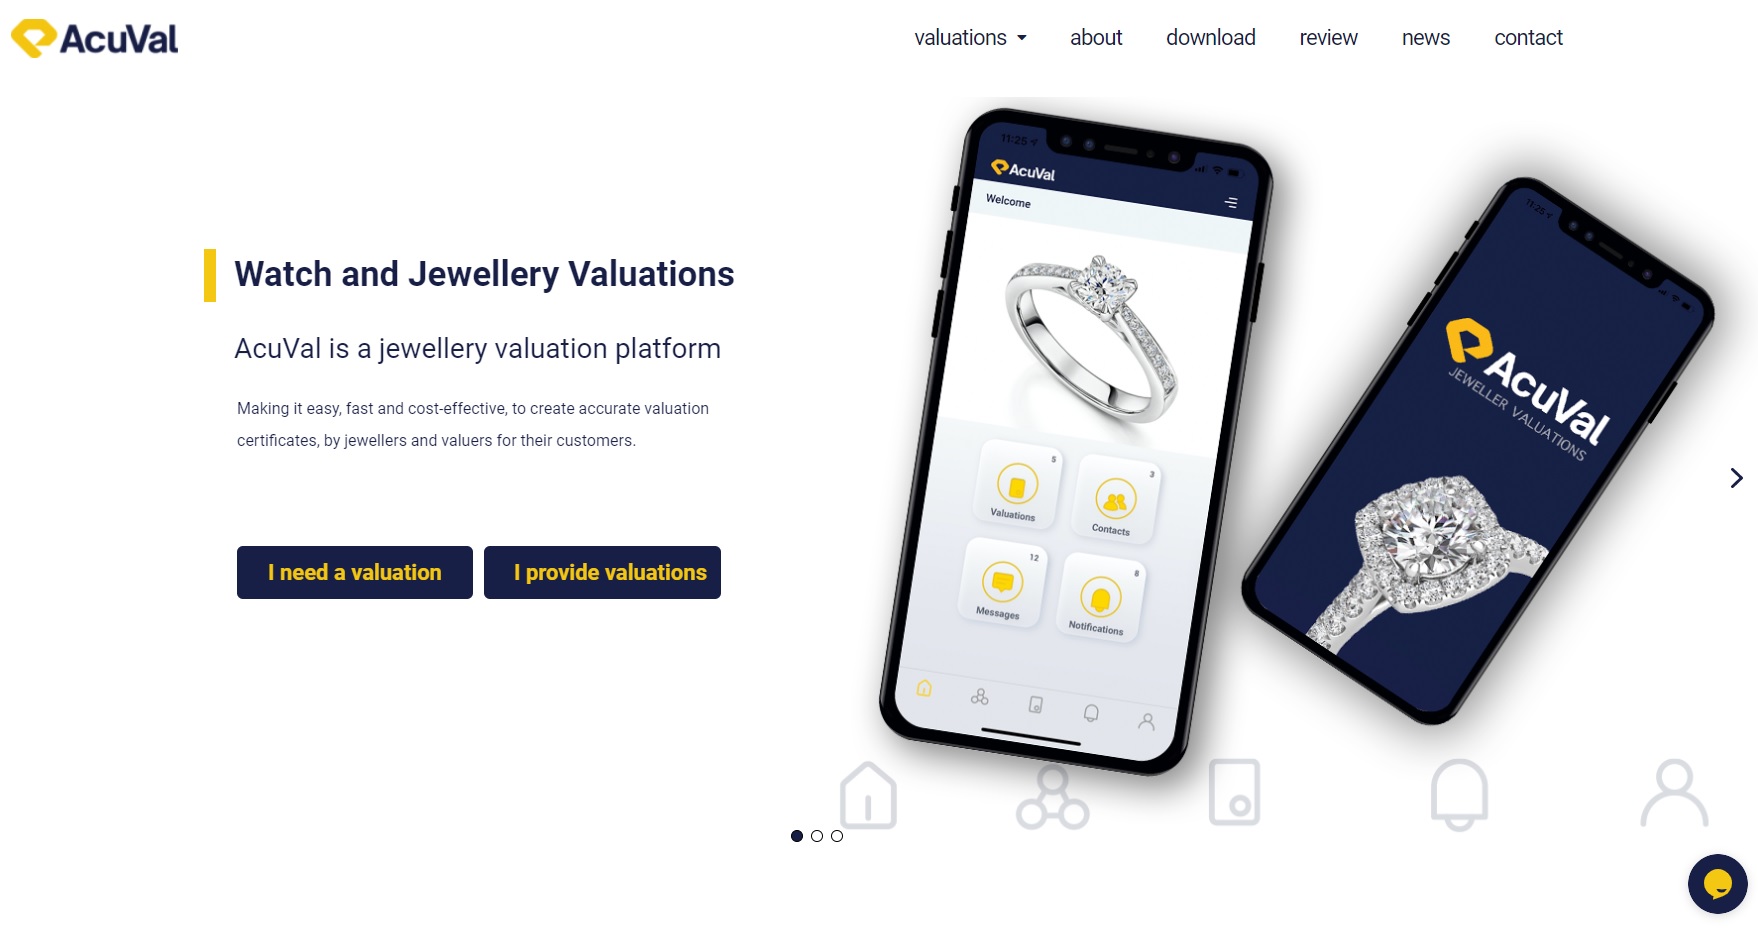 VALUATIONS MADE SIMPLE
Acuval provides Valuations on your personal items from a network of expert valuers - signed and certified, they may be used for insurance, asset management, estate planning, re-sale, auctions, and inheritance.